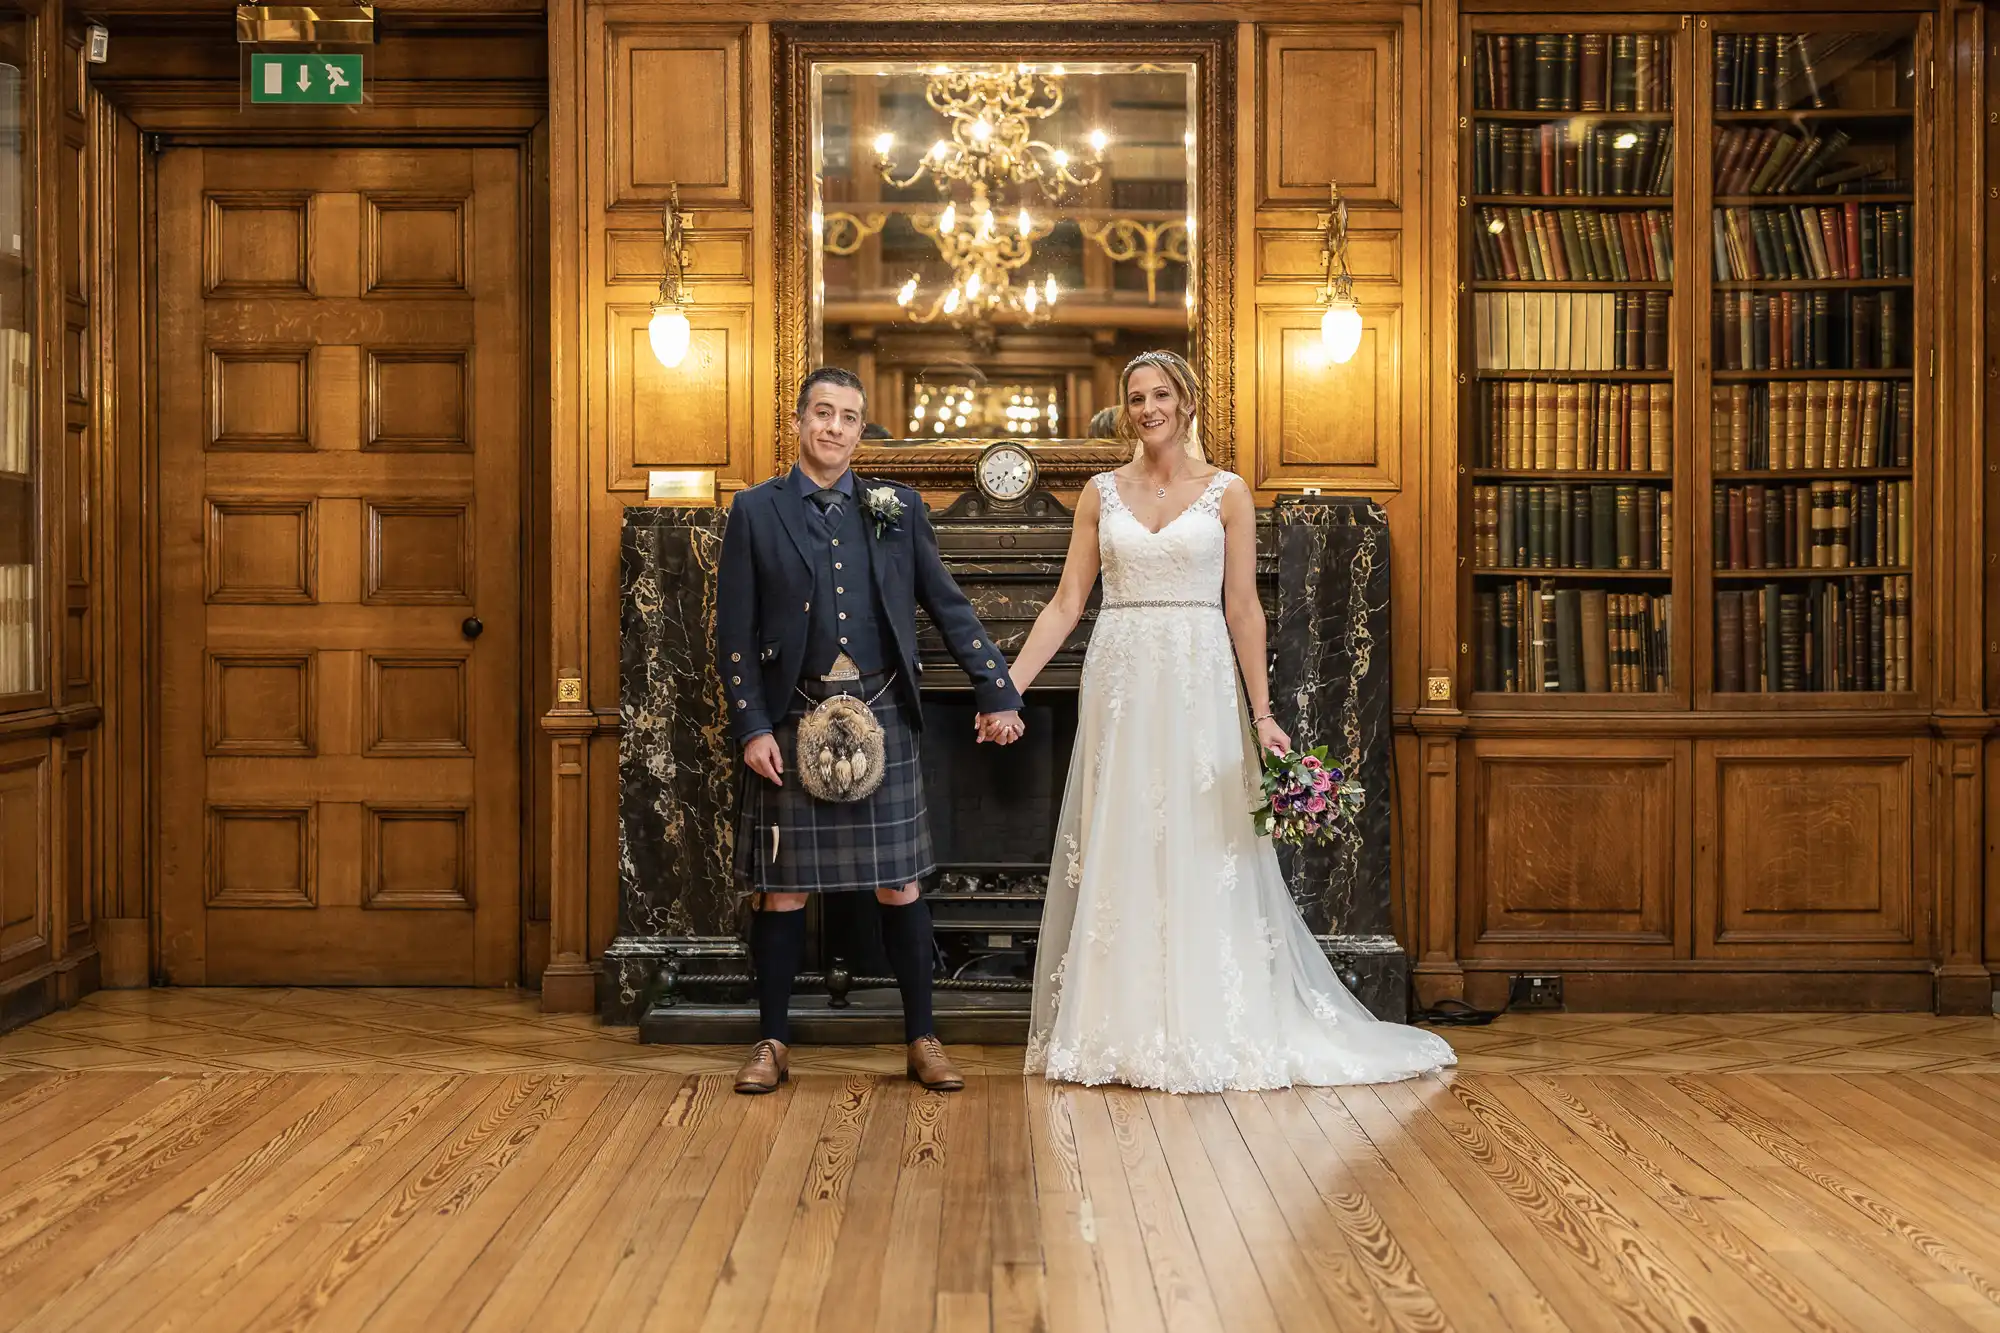 A couple in wedding attire stands in a wood-paneled room filled with bookshelves and a fireplace. The man wears traditional Scottish dress, and the woman is in a white gown holding a bouquet.